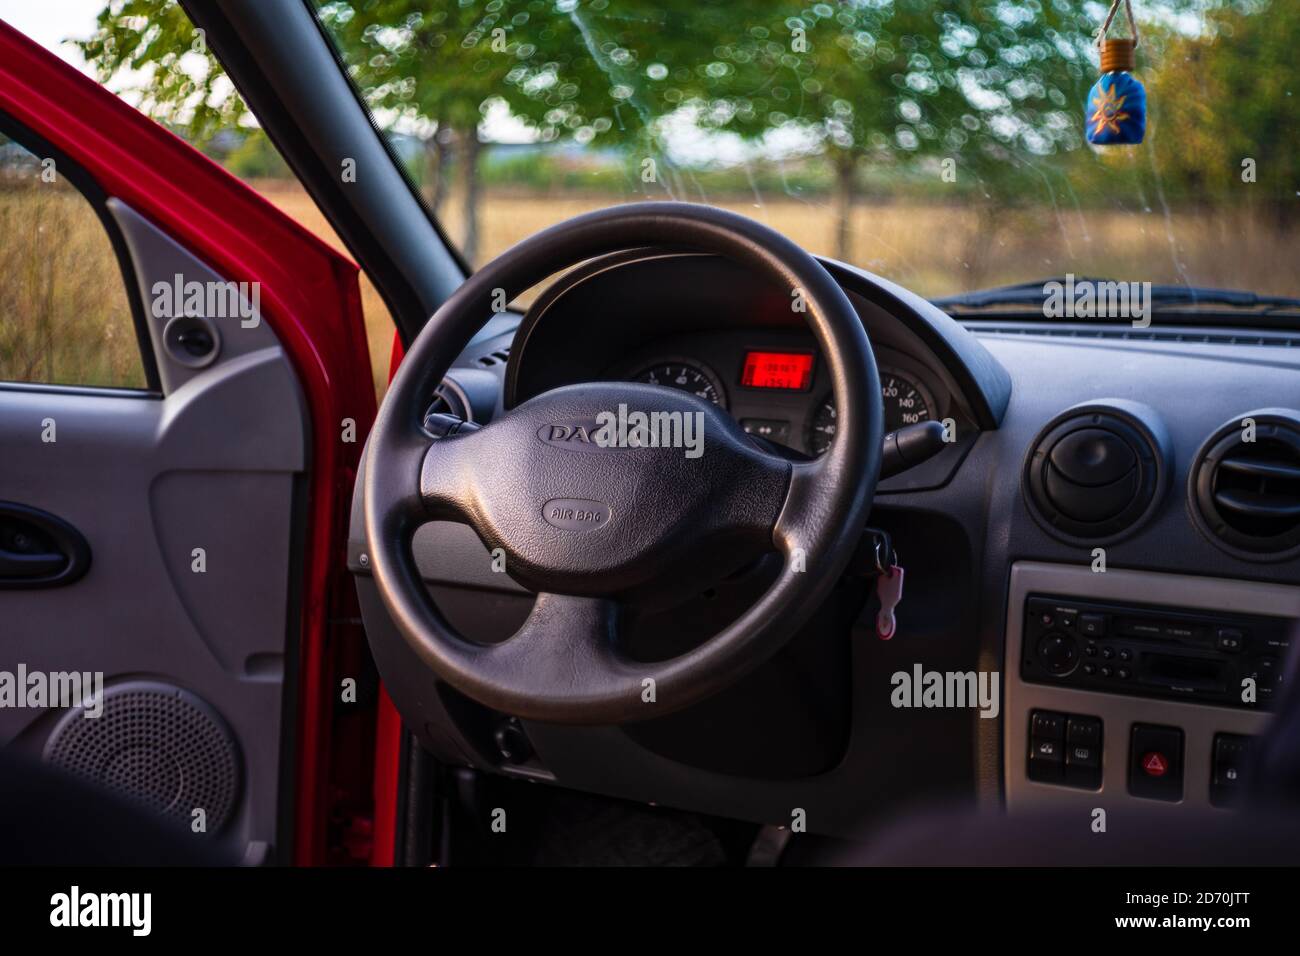 Interior of Dacia Logan, car dashboard close up of steering wheel with air  bag sign. Bucharest, Romania, 2020 Stock Photo - Alamy